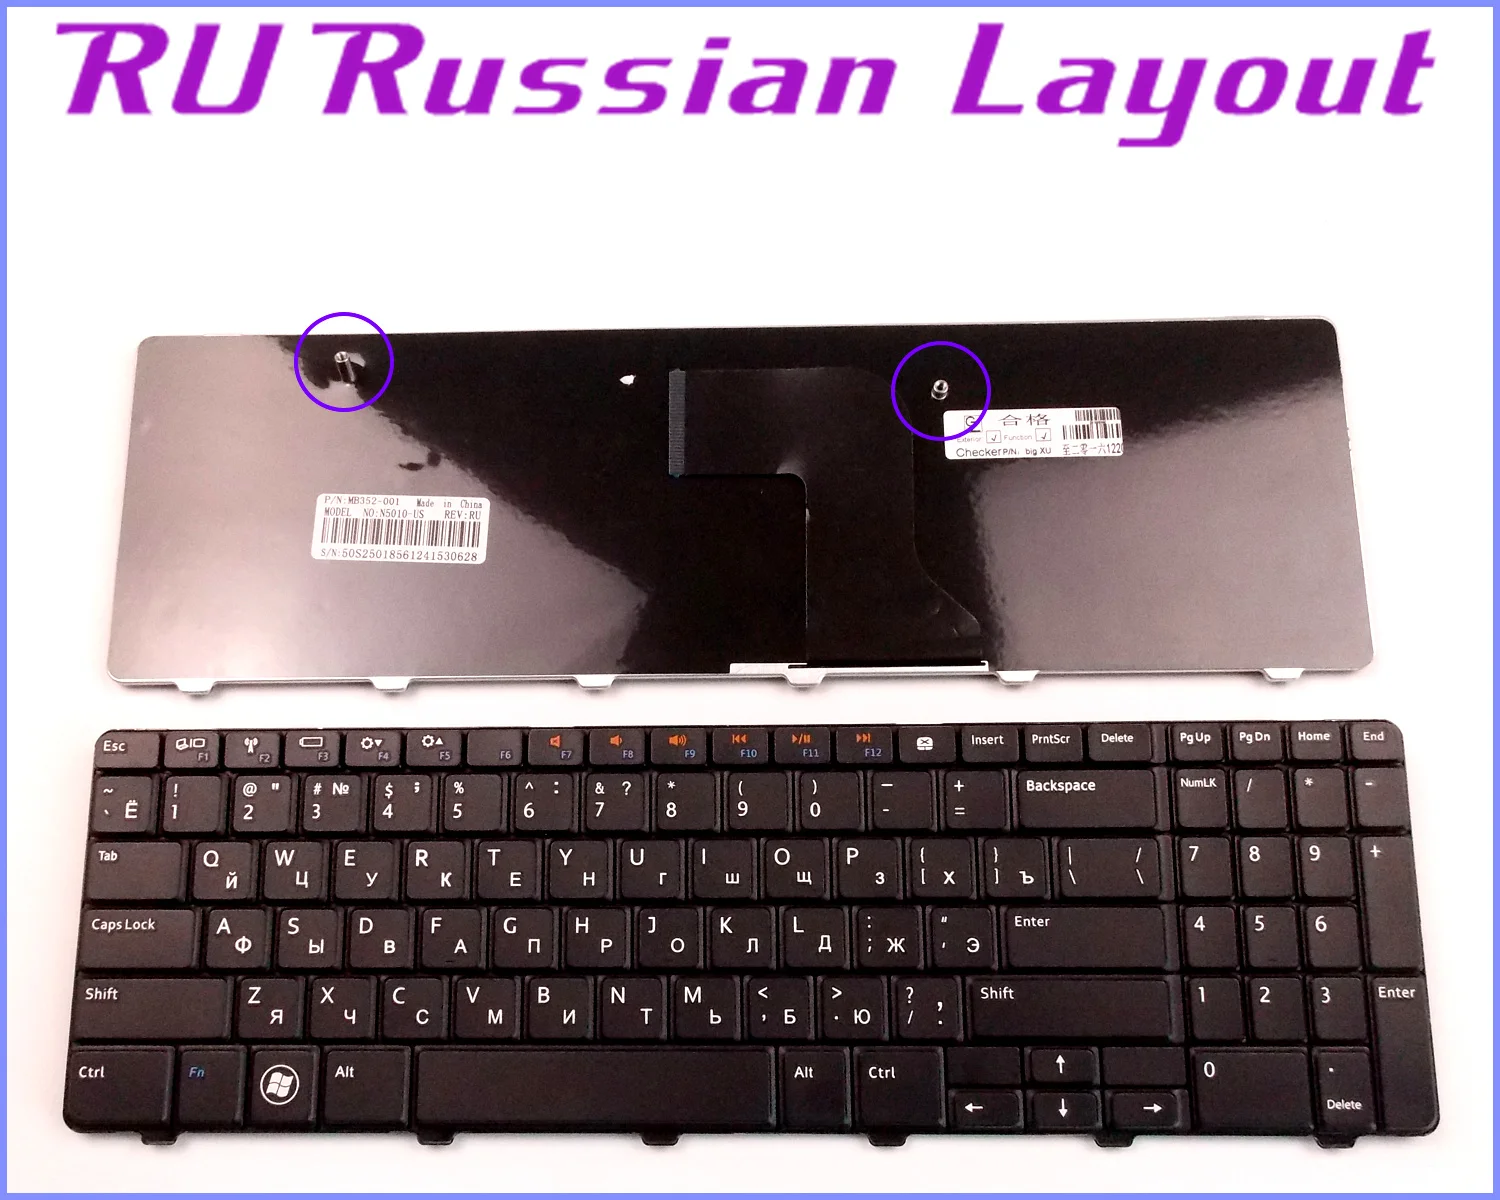 

Russian RU Layout Keyboard for Dell Inspiron 15 15R 5010 N5010 M5010 NSK-DRASW Laptop/Notebook